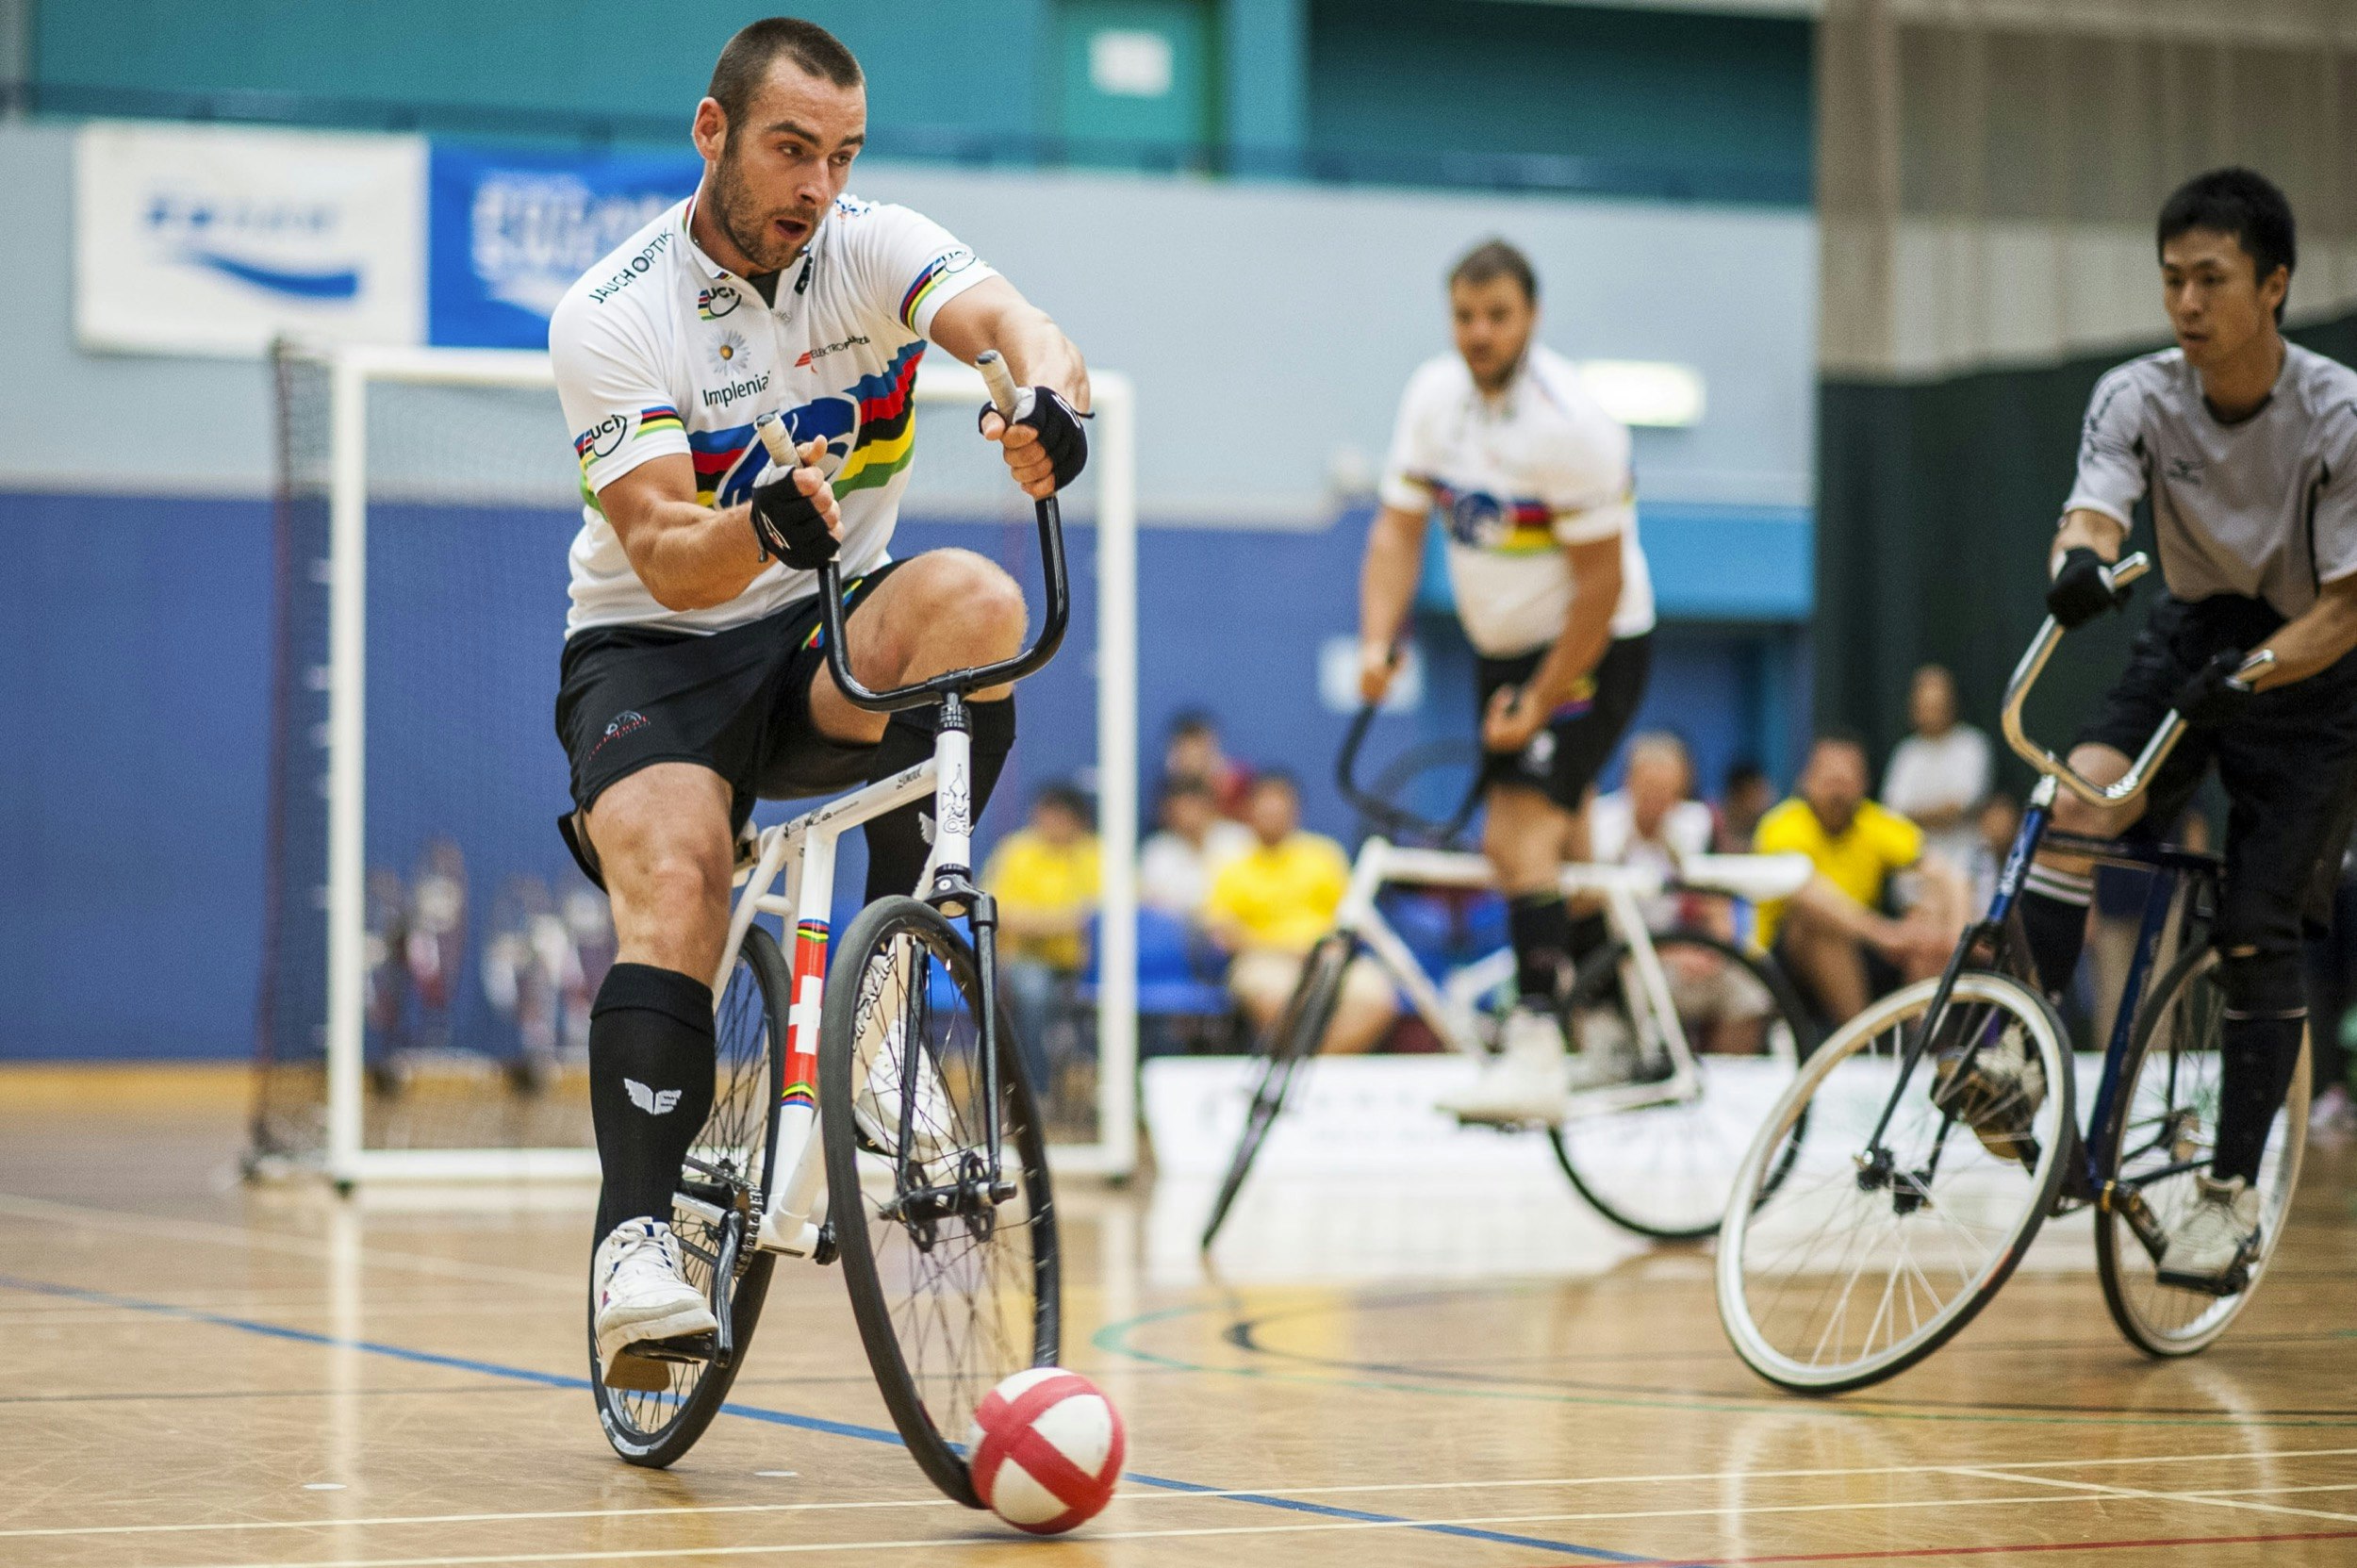 A man uses a specialty bicycle to hit a small ball across a hard gym floor; unique sporting events